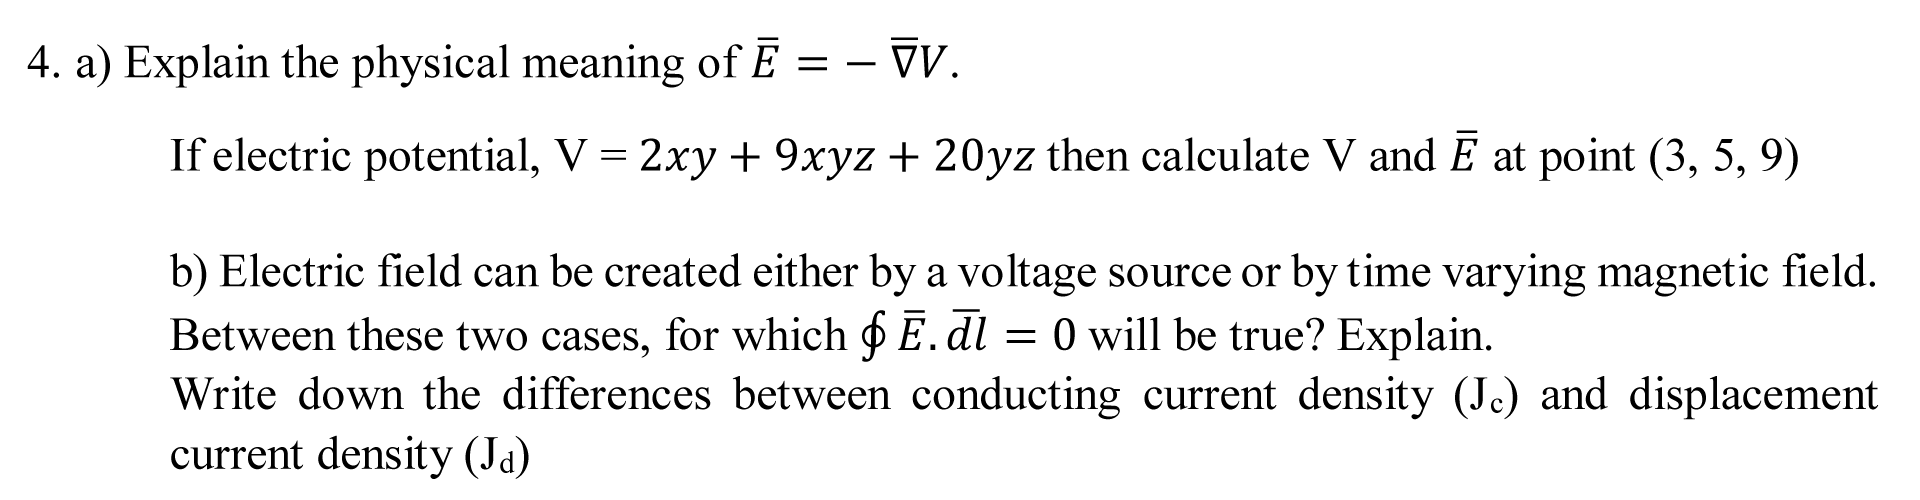 a) Explain the physical meaning of Ē = – V.
If electric potential, V = 2xy + 9xyz + 20yz then calculate V and Ē at point (3, 5, 9)
b) Electric field can be created either by a voltage source or by time varying magnetic field.
Between these two cases, for which o E. dl
Write down the differences between conducting current density (Jc) and displacement
current density (Ja)
= 0 will be true? Explain.
